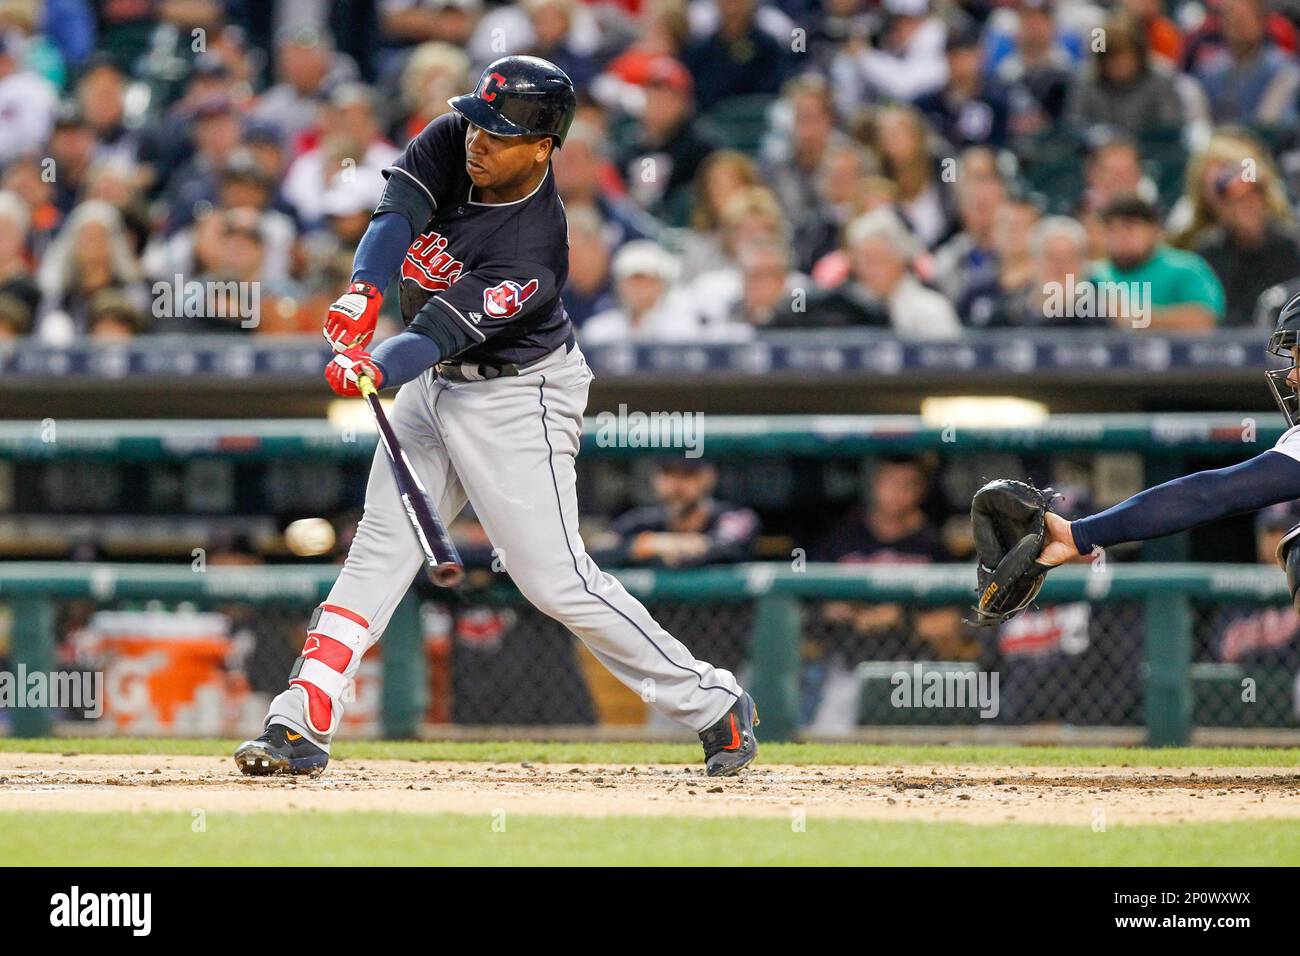 September 26, 2016: Cleveland Indians third baseman Jose Ramirez (11) at  bat during a regular season game between the Cleveland Indians and the  Detroit Tigers played at Comerica Park in Detroit, MI. (